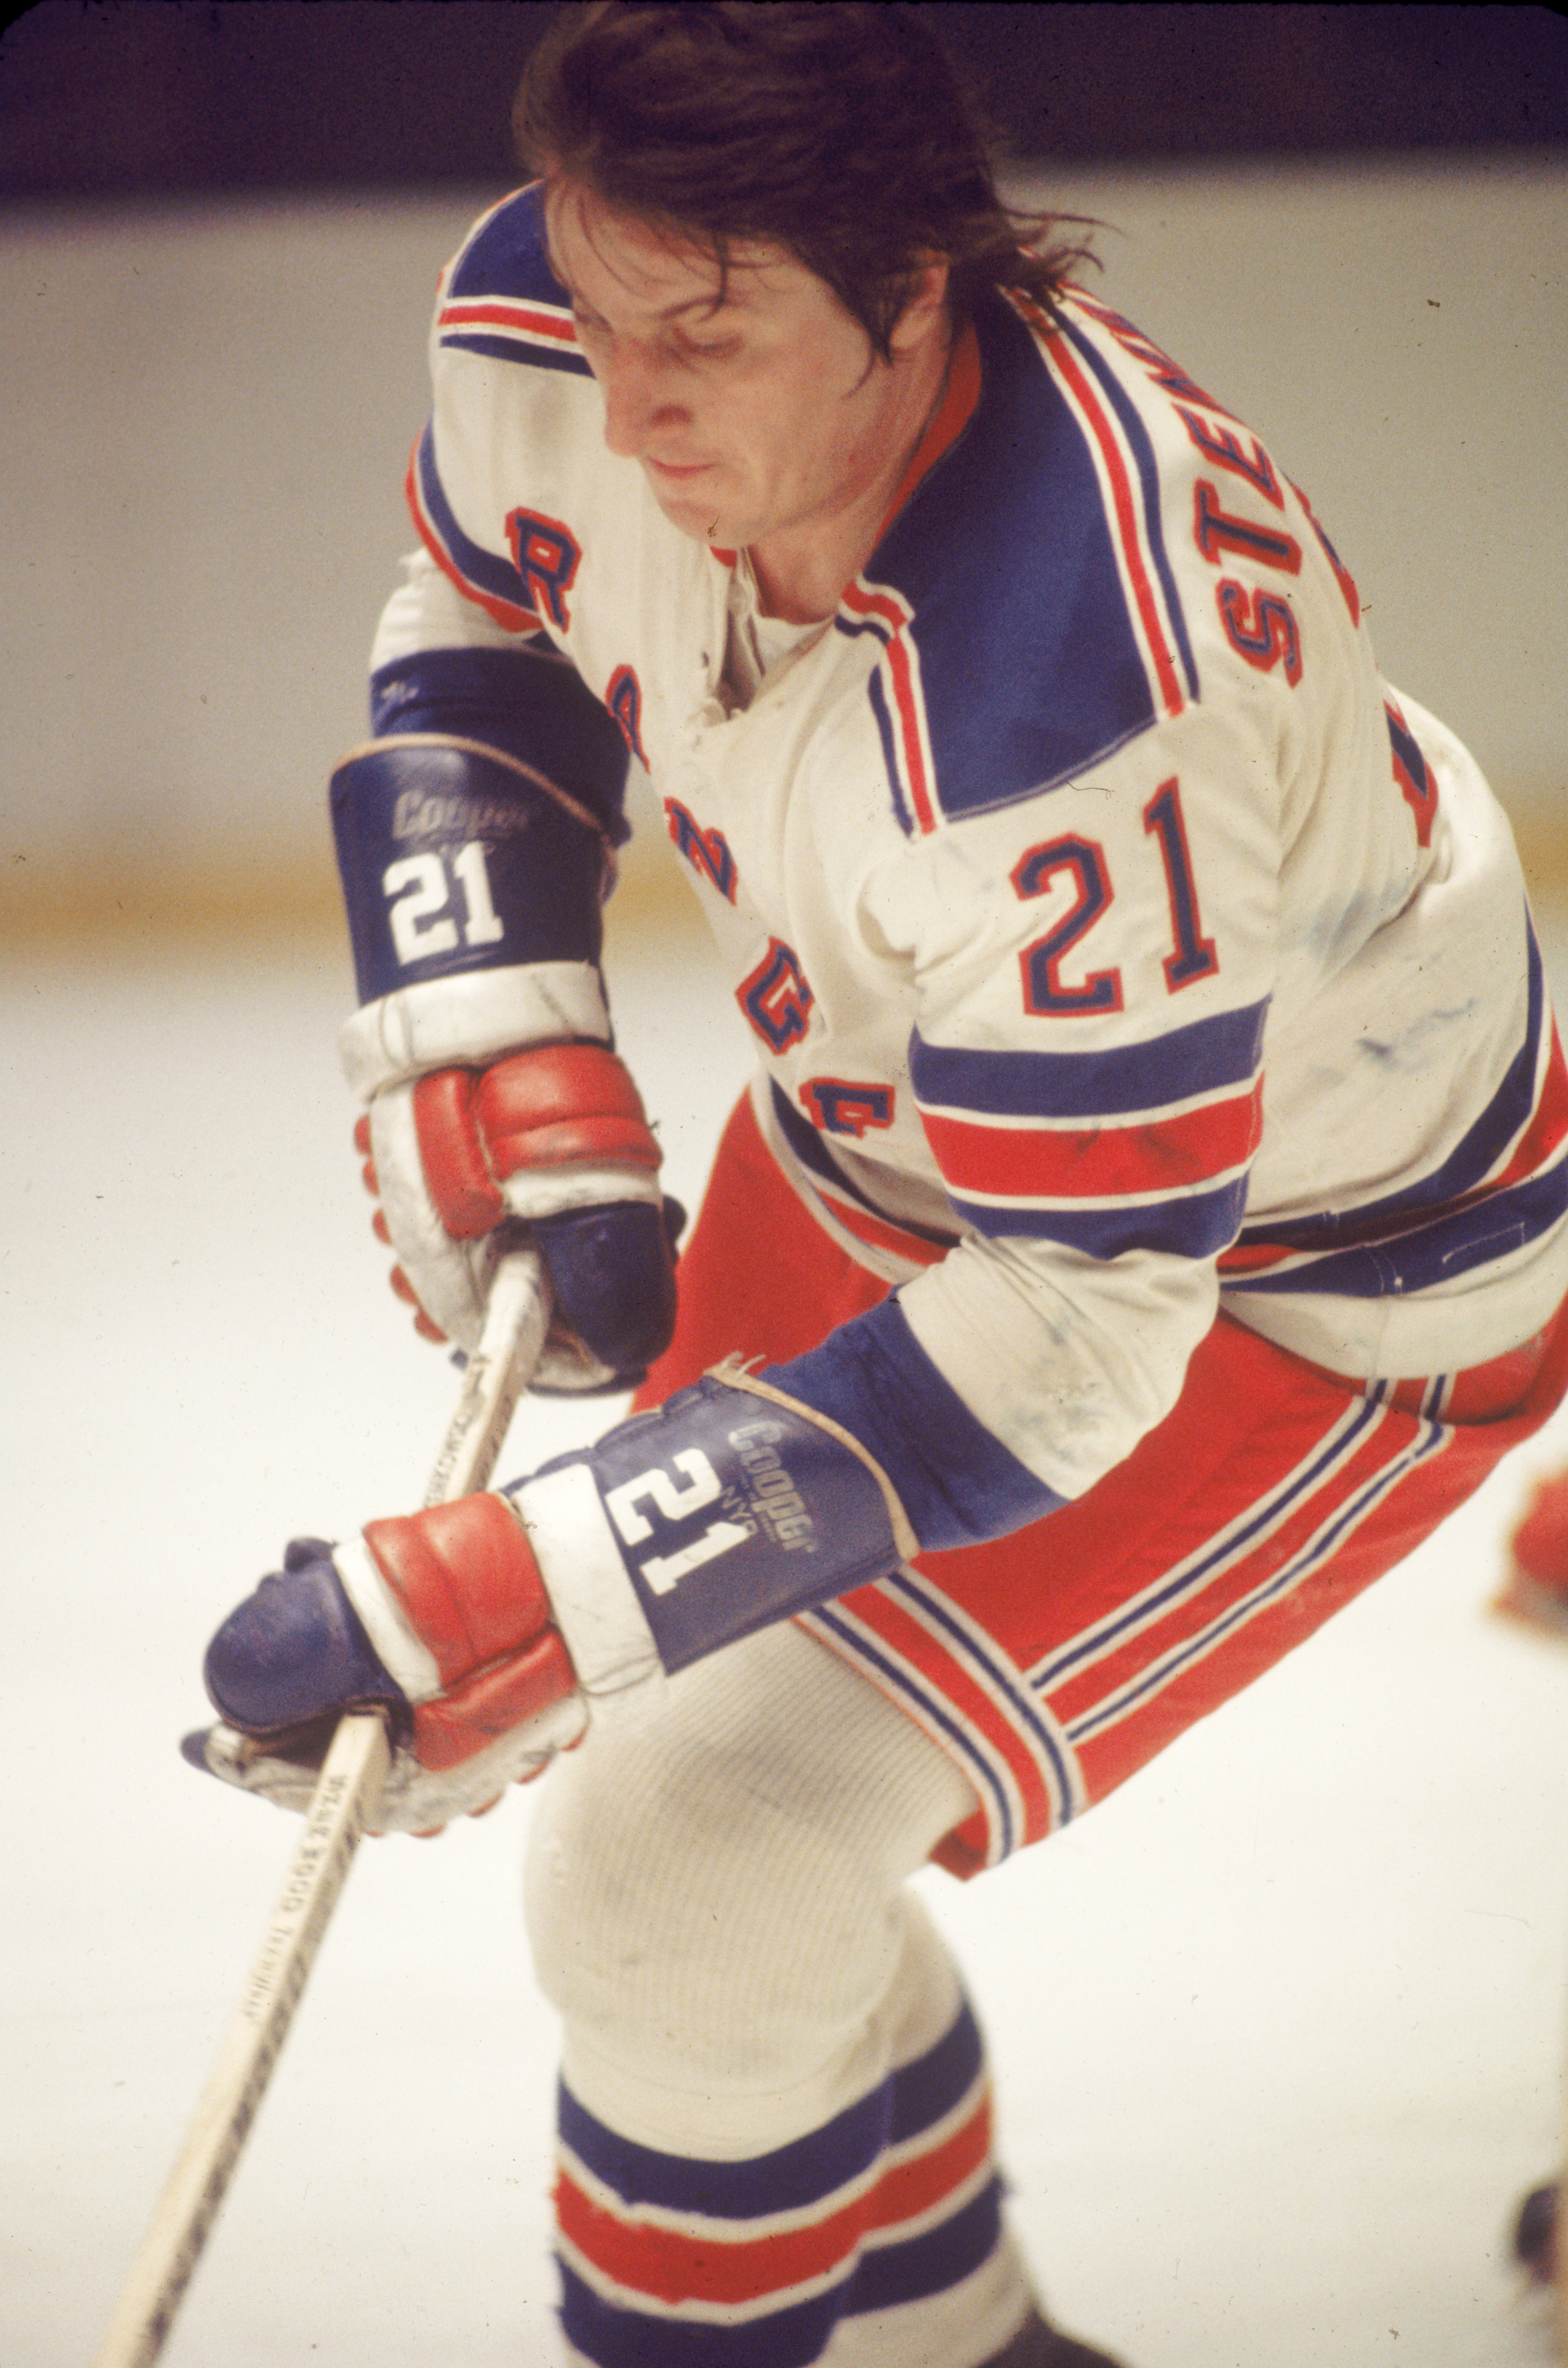 Canadian professional ice hockey player Pete Stemkowski #21 of the New York Rangers skates on the ice during a home game at Madison Square Garden, New York, 1970s. Stemkowski played for the Rangers from 1971 to 1977. (Photo by Melchior DiGiacomo/Getty Images)